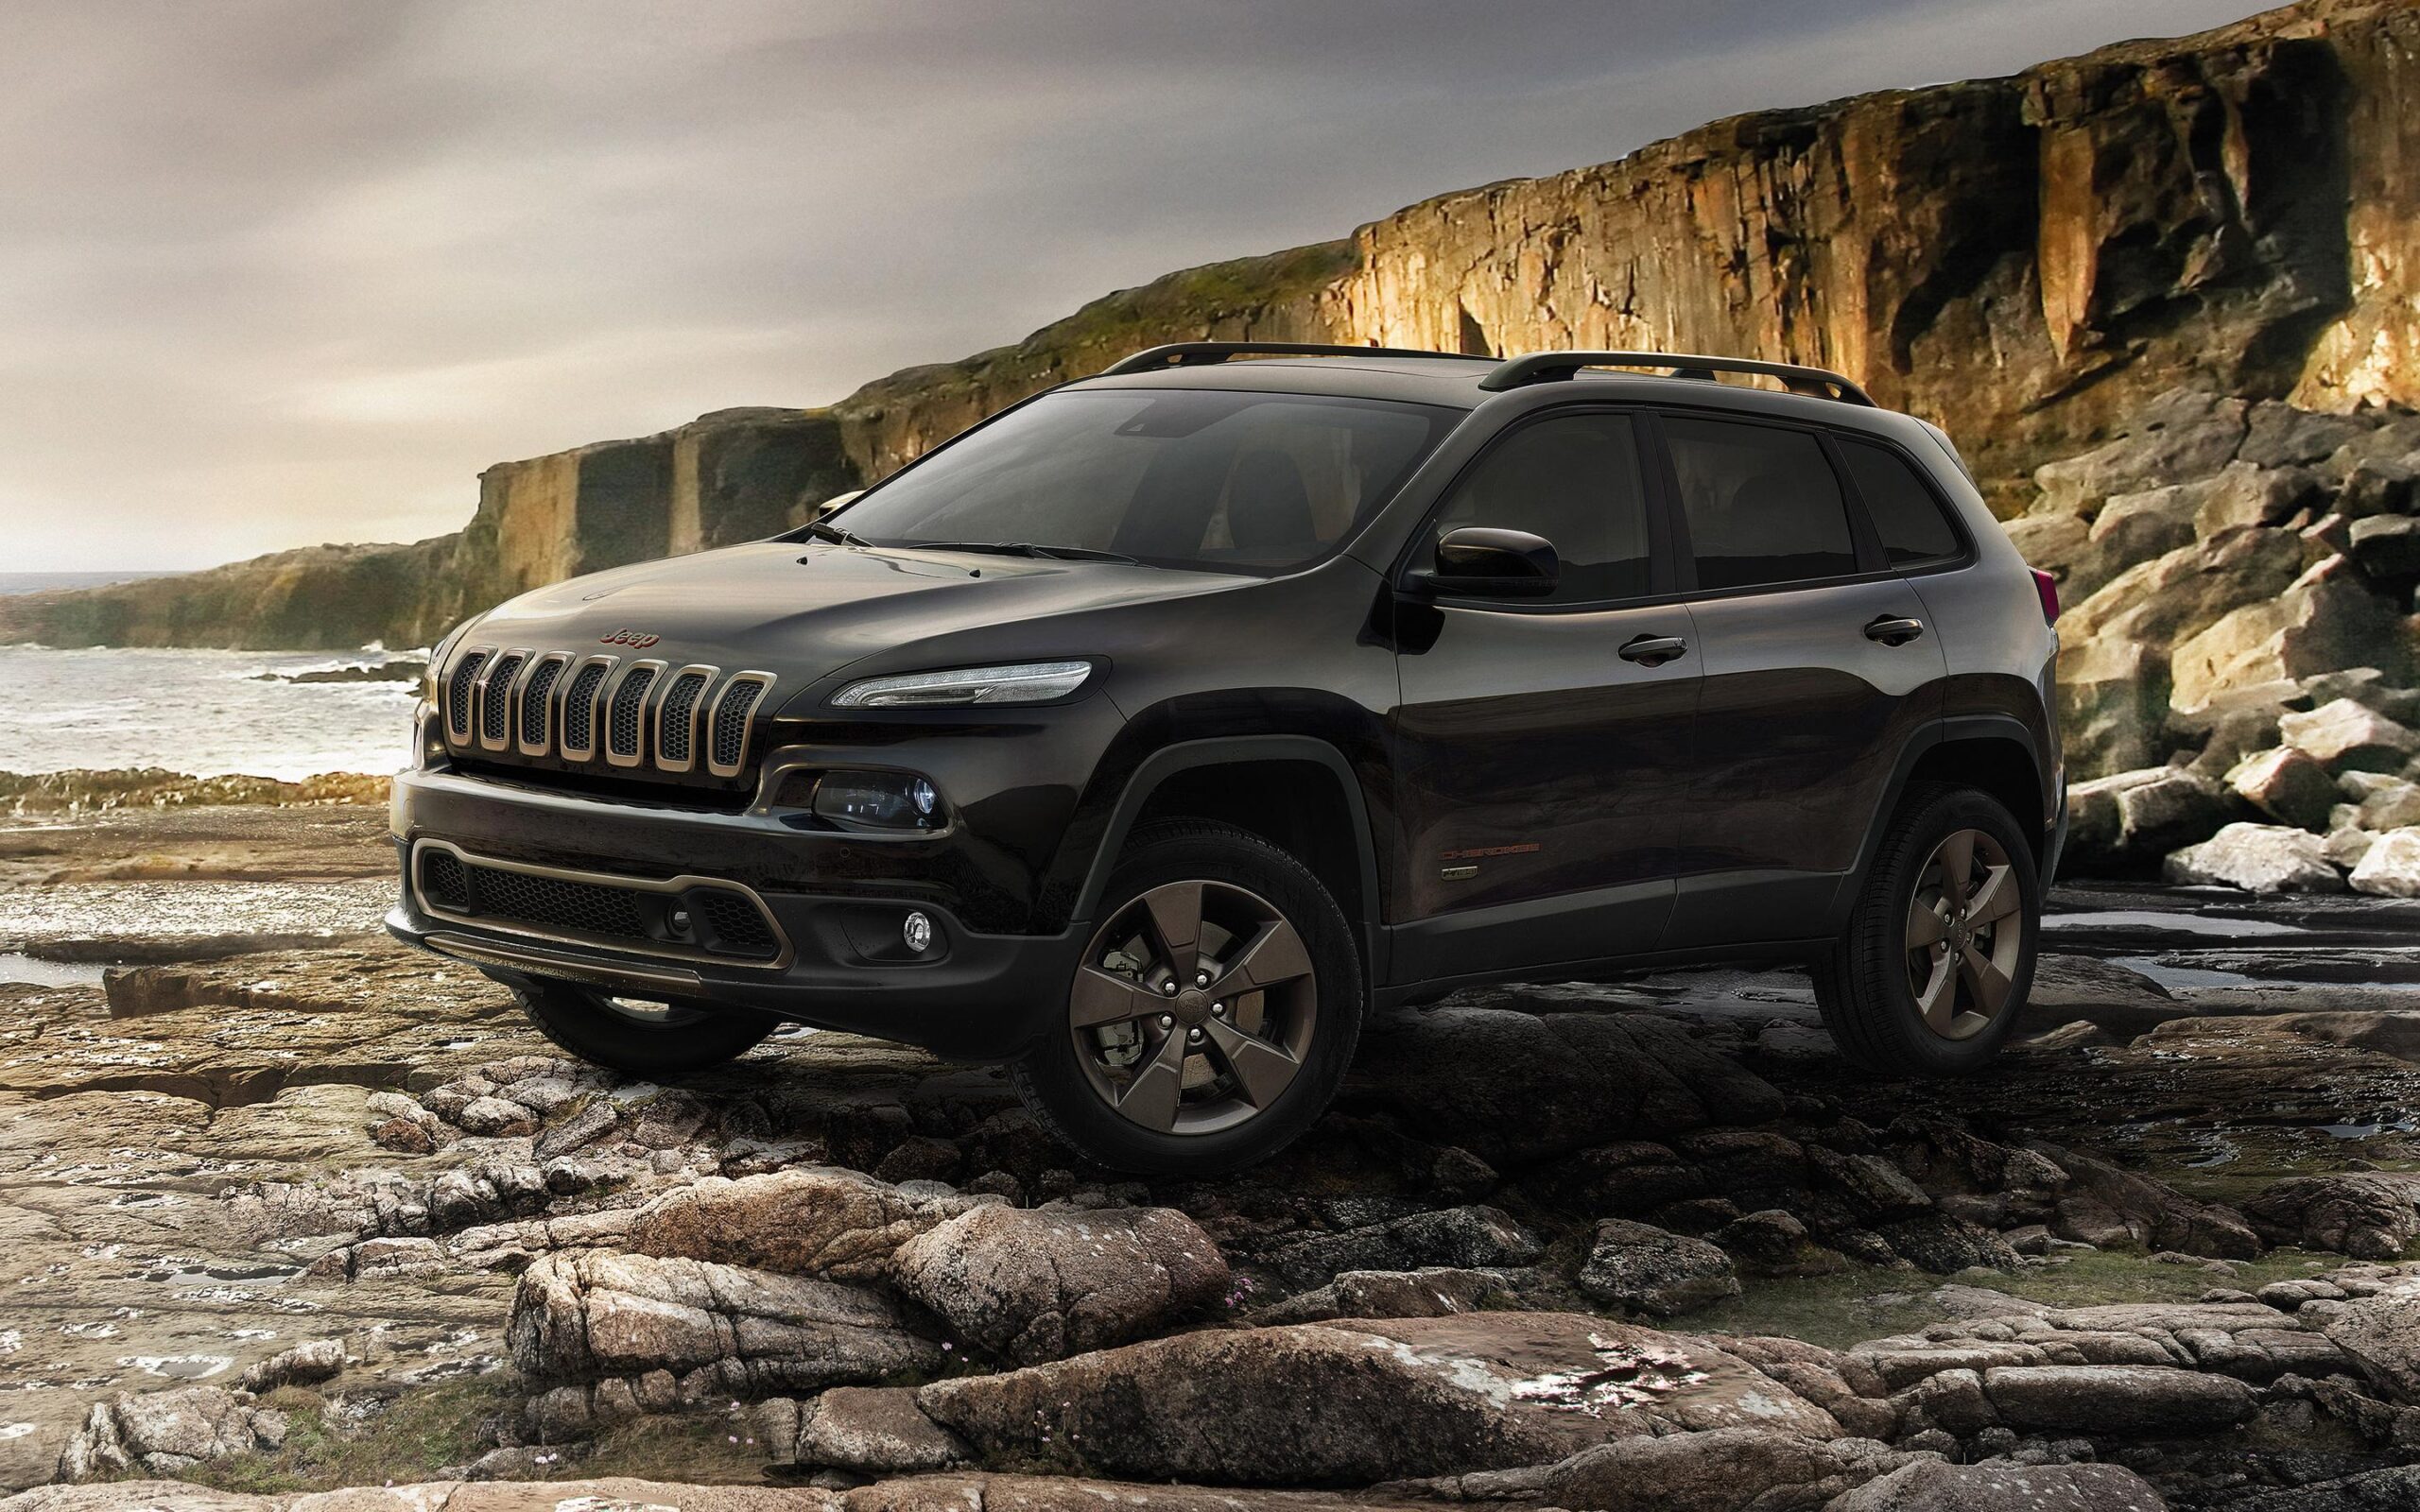 Jeep Cherokee th Anniversary Model wallpapers